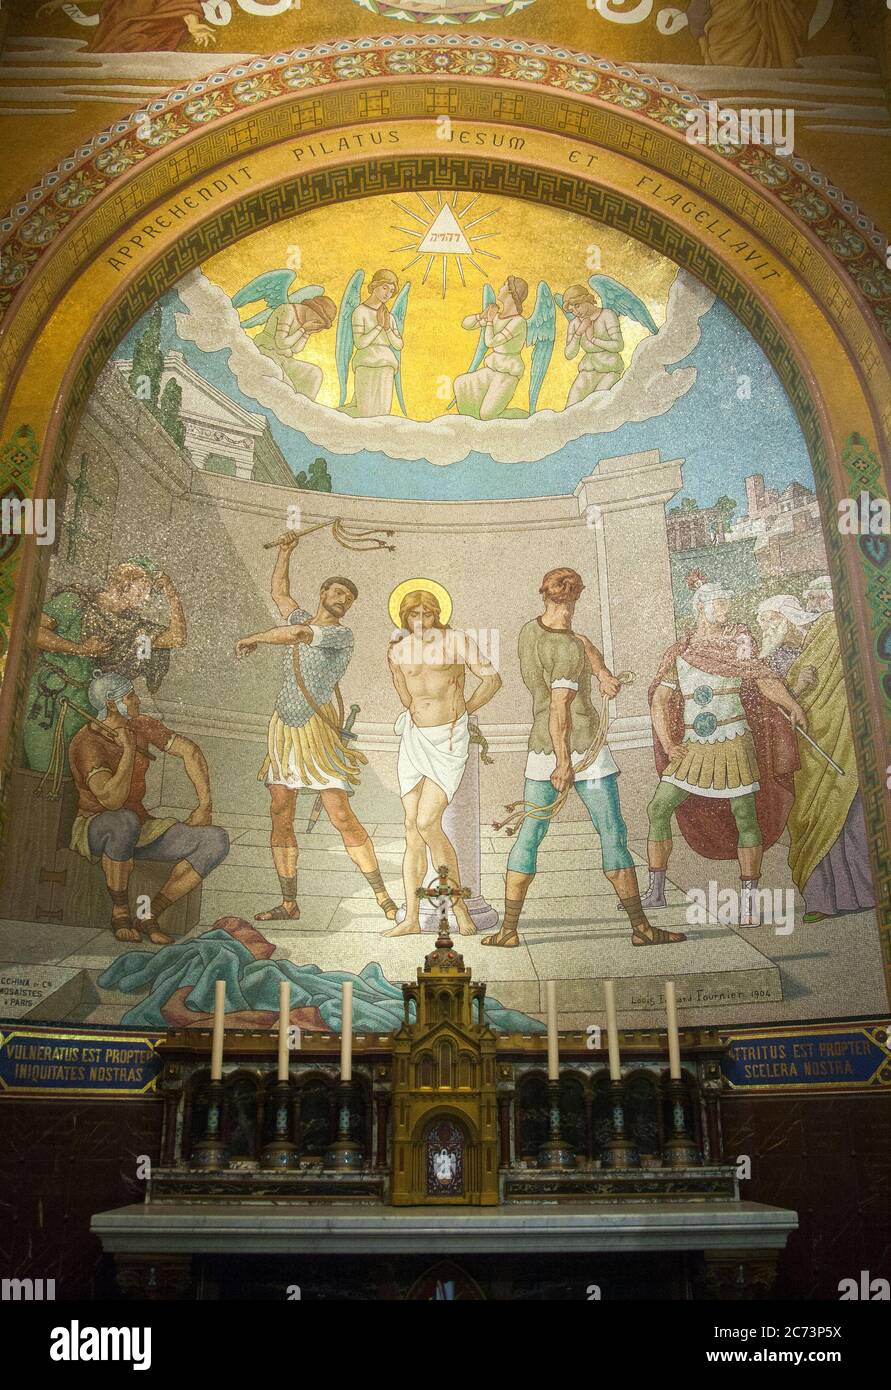 Apr 28. 2014 Lourdes France Soldiers took Jesus and scourged. Monumental mosaic murals adorn the interior of Rosary Basilica. Stock Photo